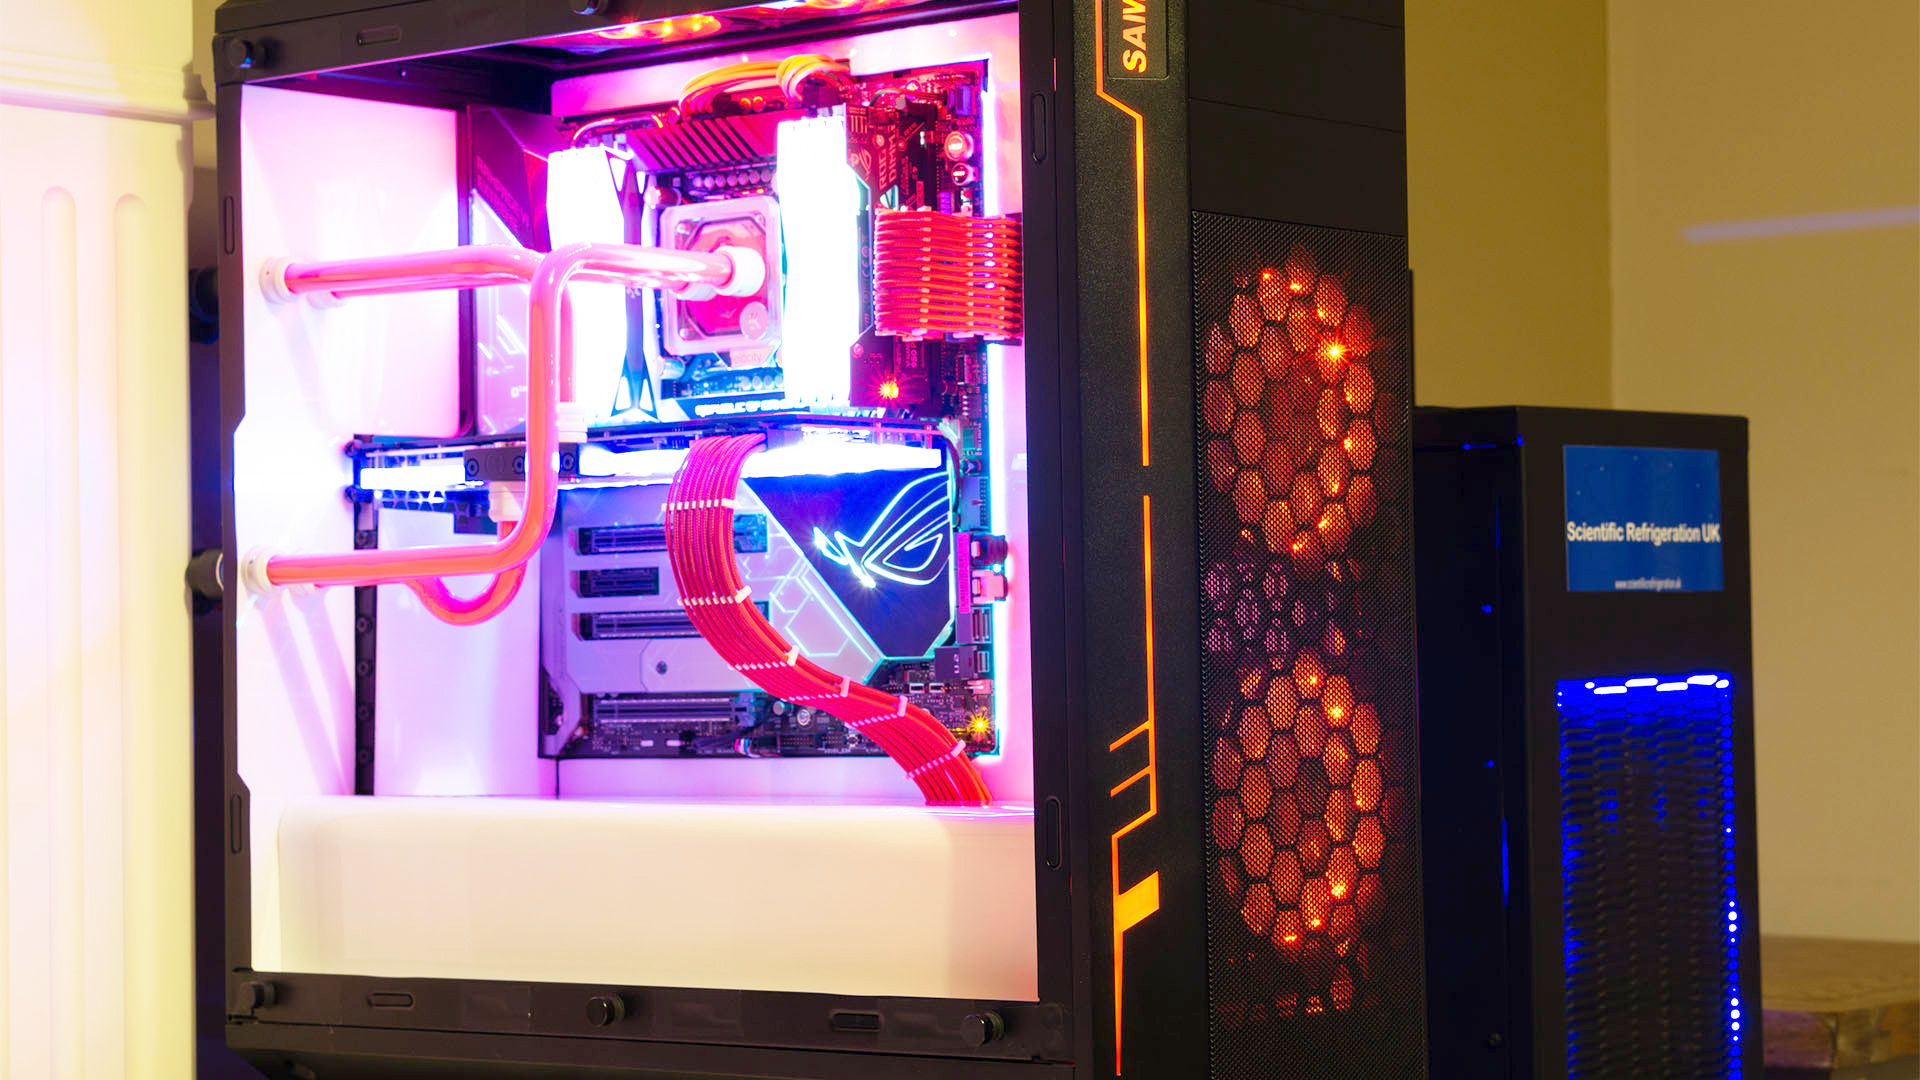 This gaming PC build is cooled by an external icebox